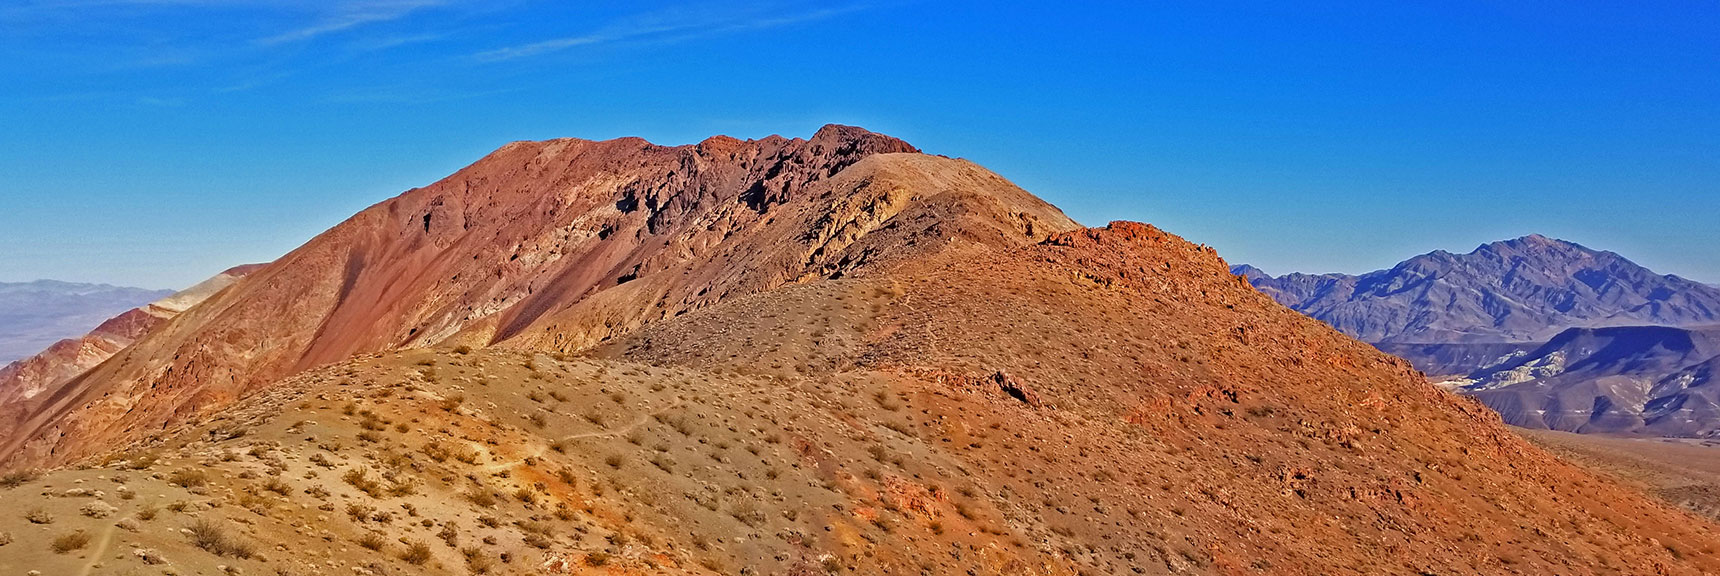 Closing in Toward the Final Summit Approach to Mt. Perry | Dante's View to Mt. Perry | Death Valley National Park, CA